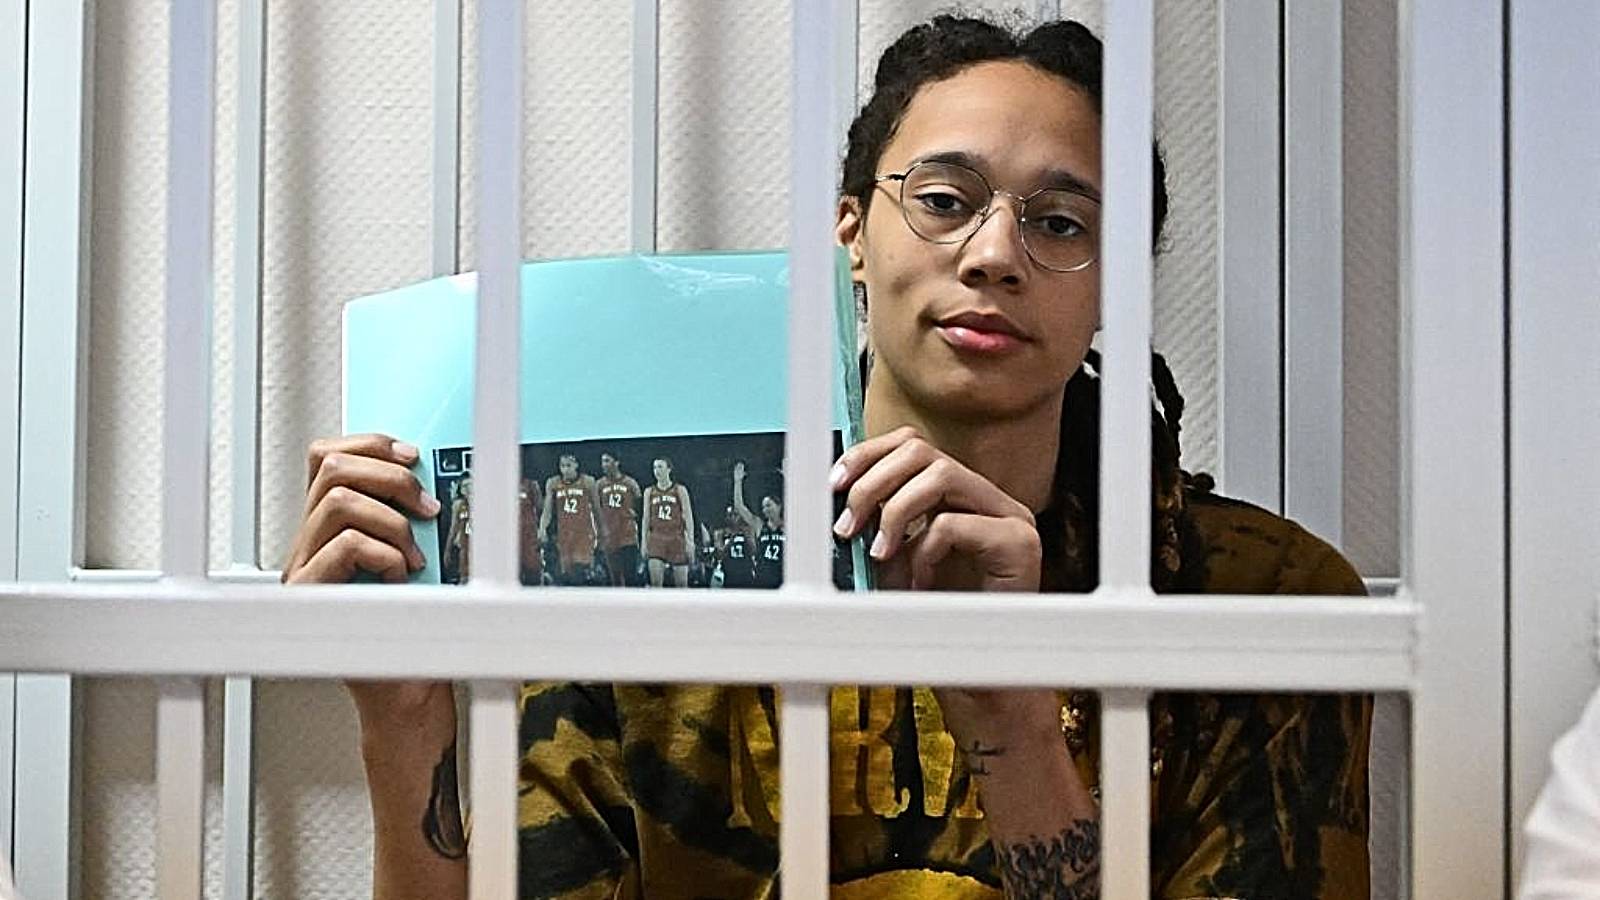 TOPSHOT - US WNBA basketball superstar Brittney Griner sits inside a defendants' cage during a hearing at the Khimki Court in the town of Khimki outside Moscow on July 15, 2022. 